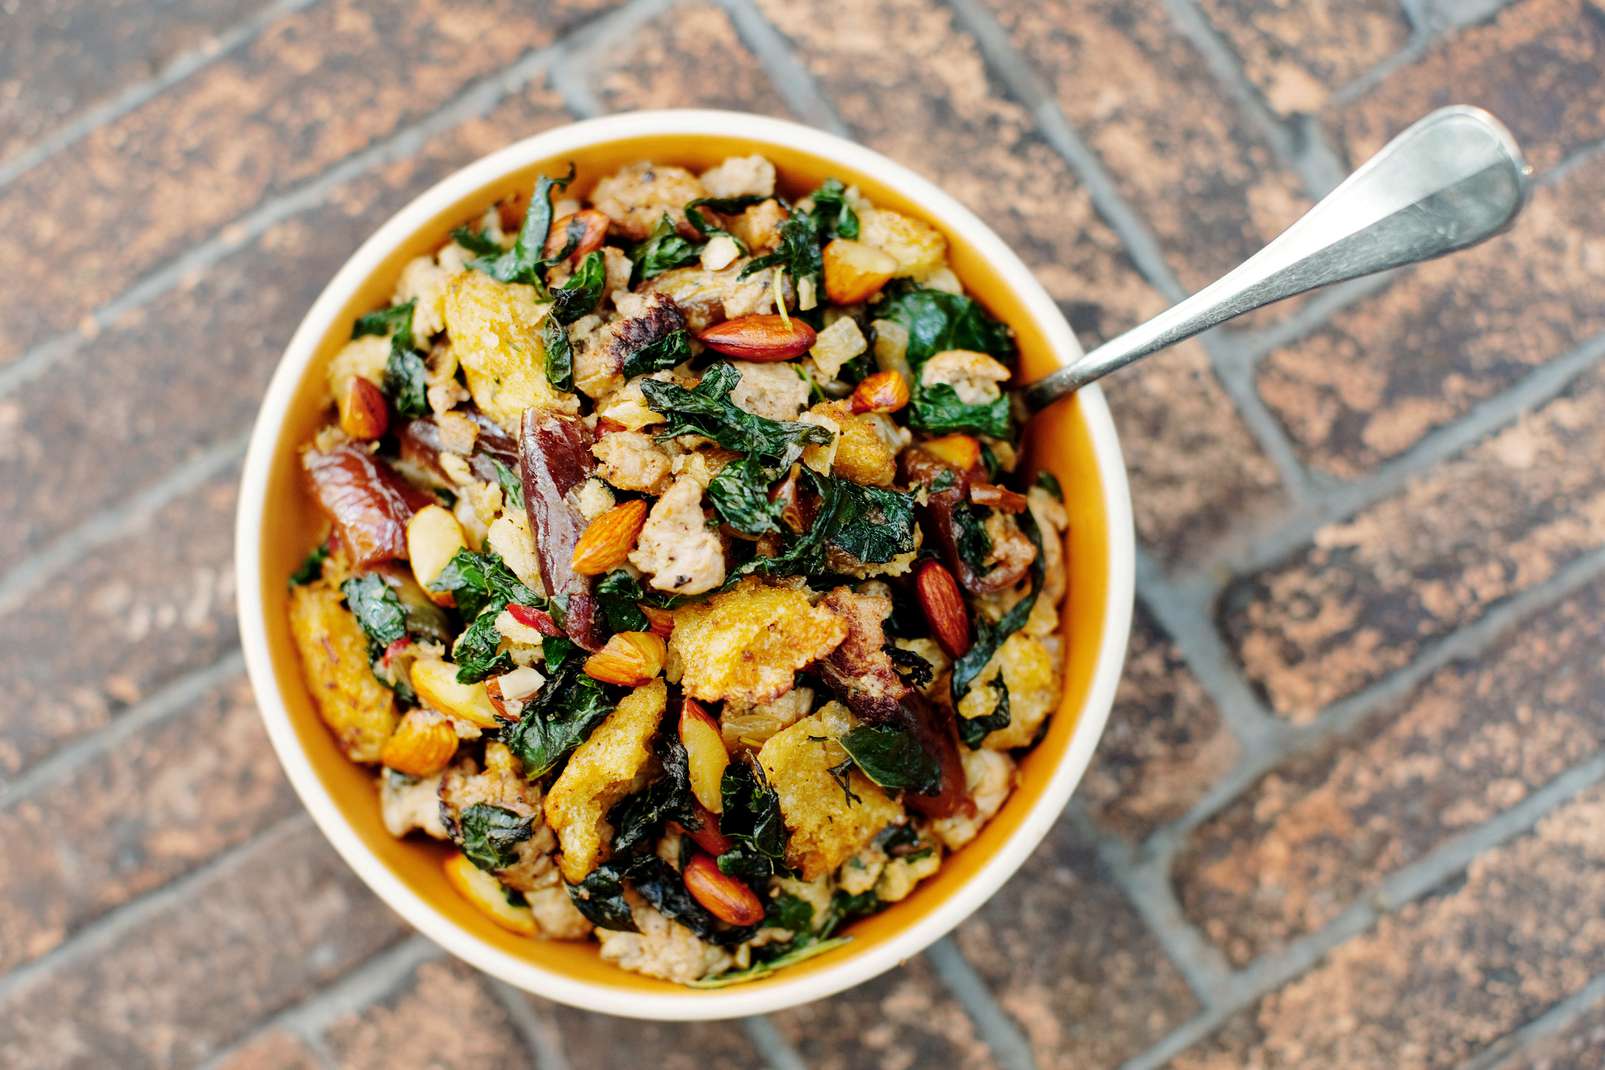 Sourdough Stuffing With Kale, Dates and Turkey Sausage